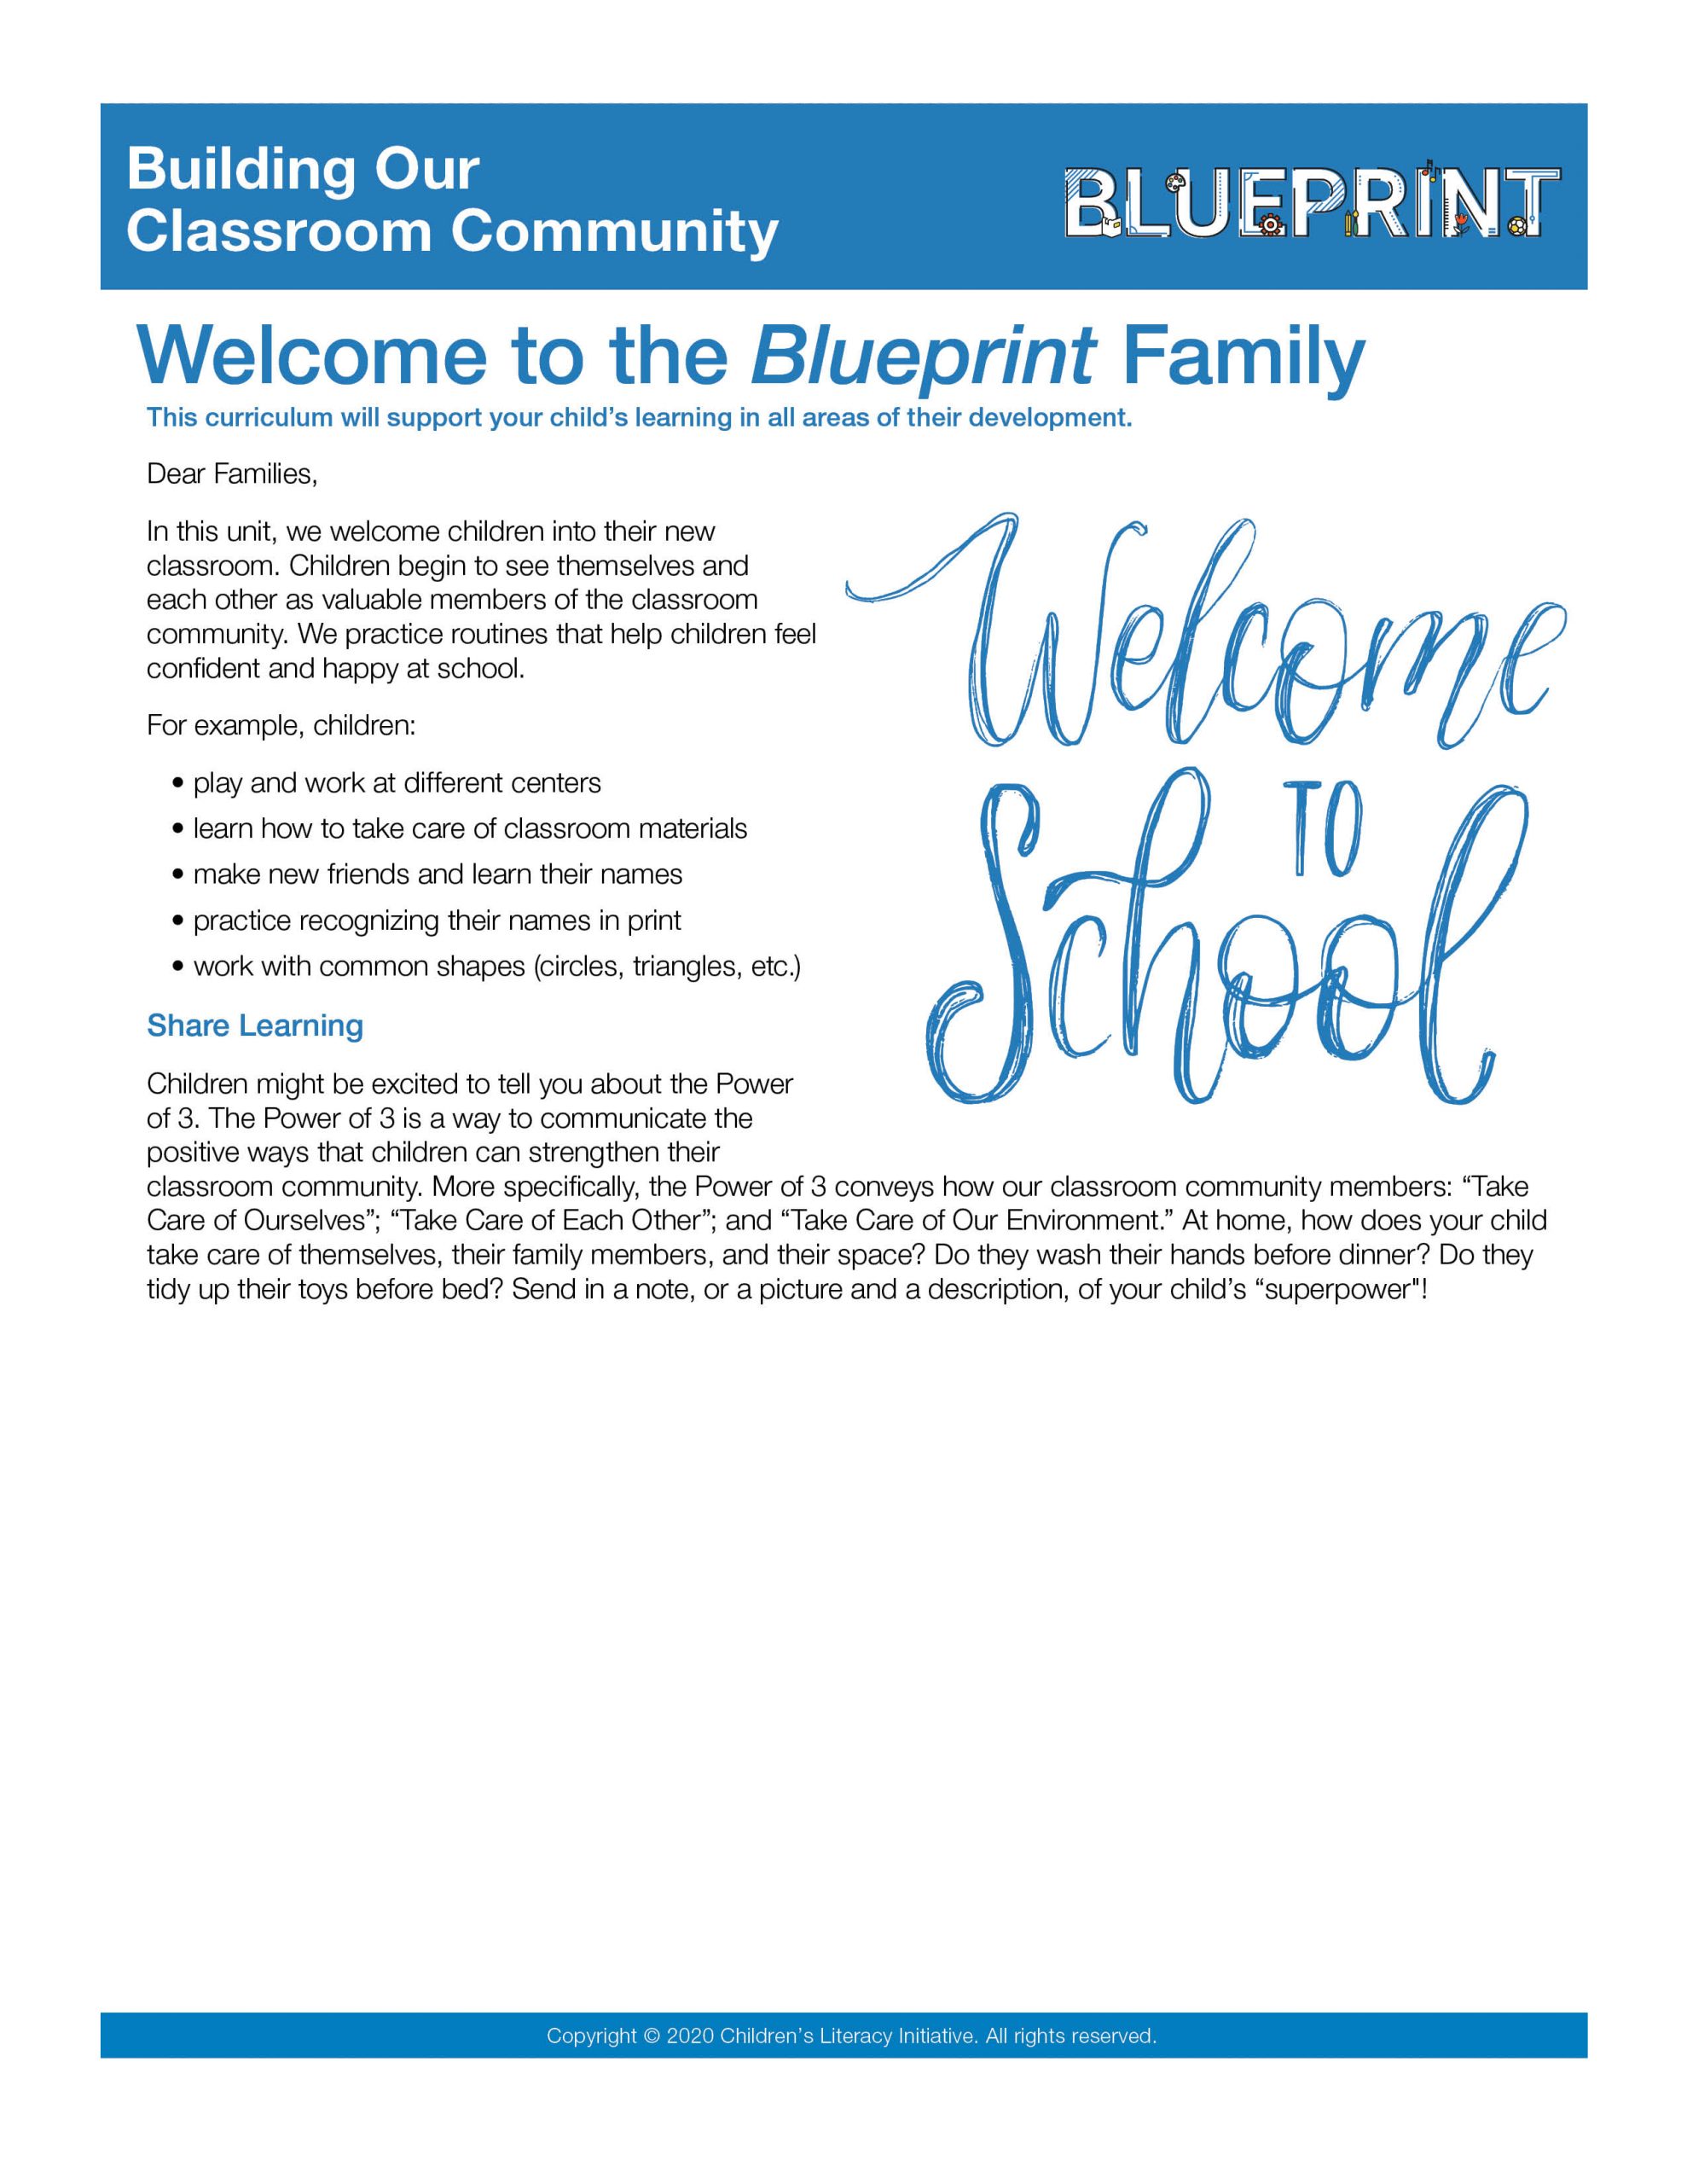 Family Letter - Welcome to the Blueprint Family